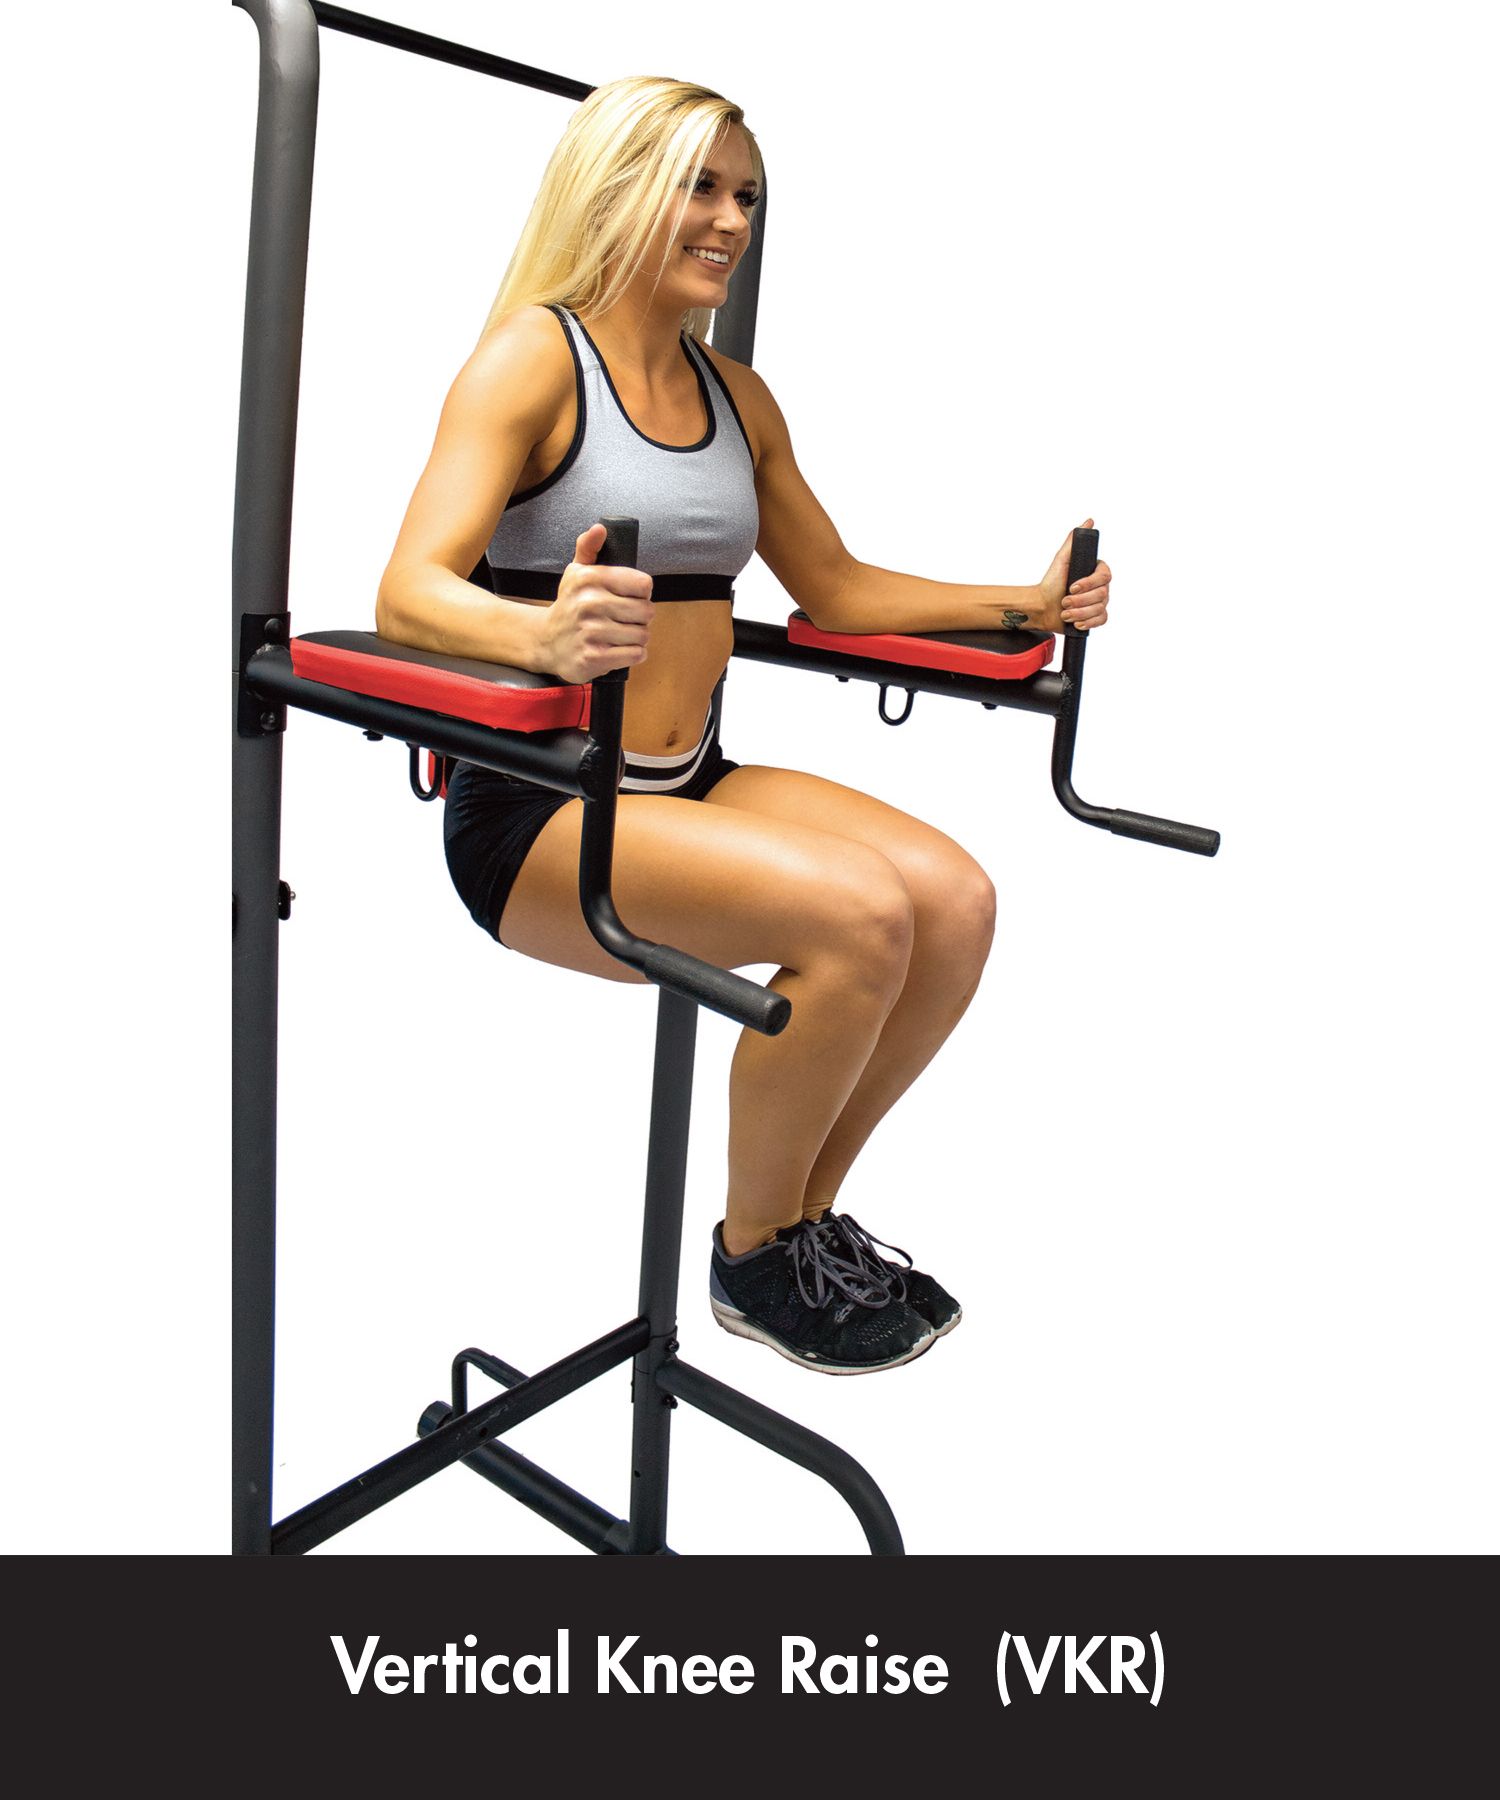 Health Gear CFT 3.0 Functional Cross Training Tower